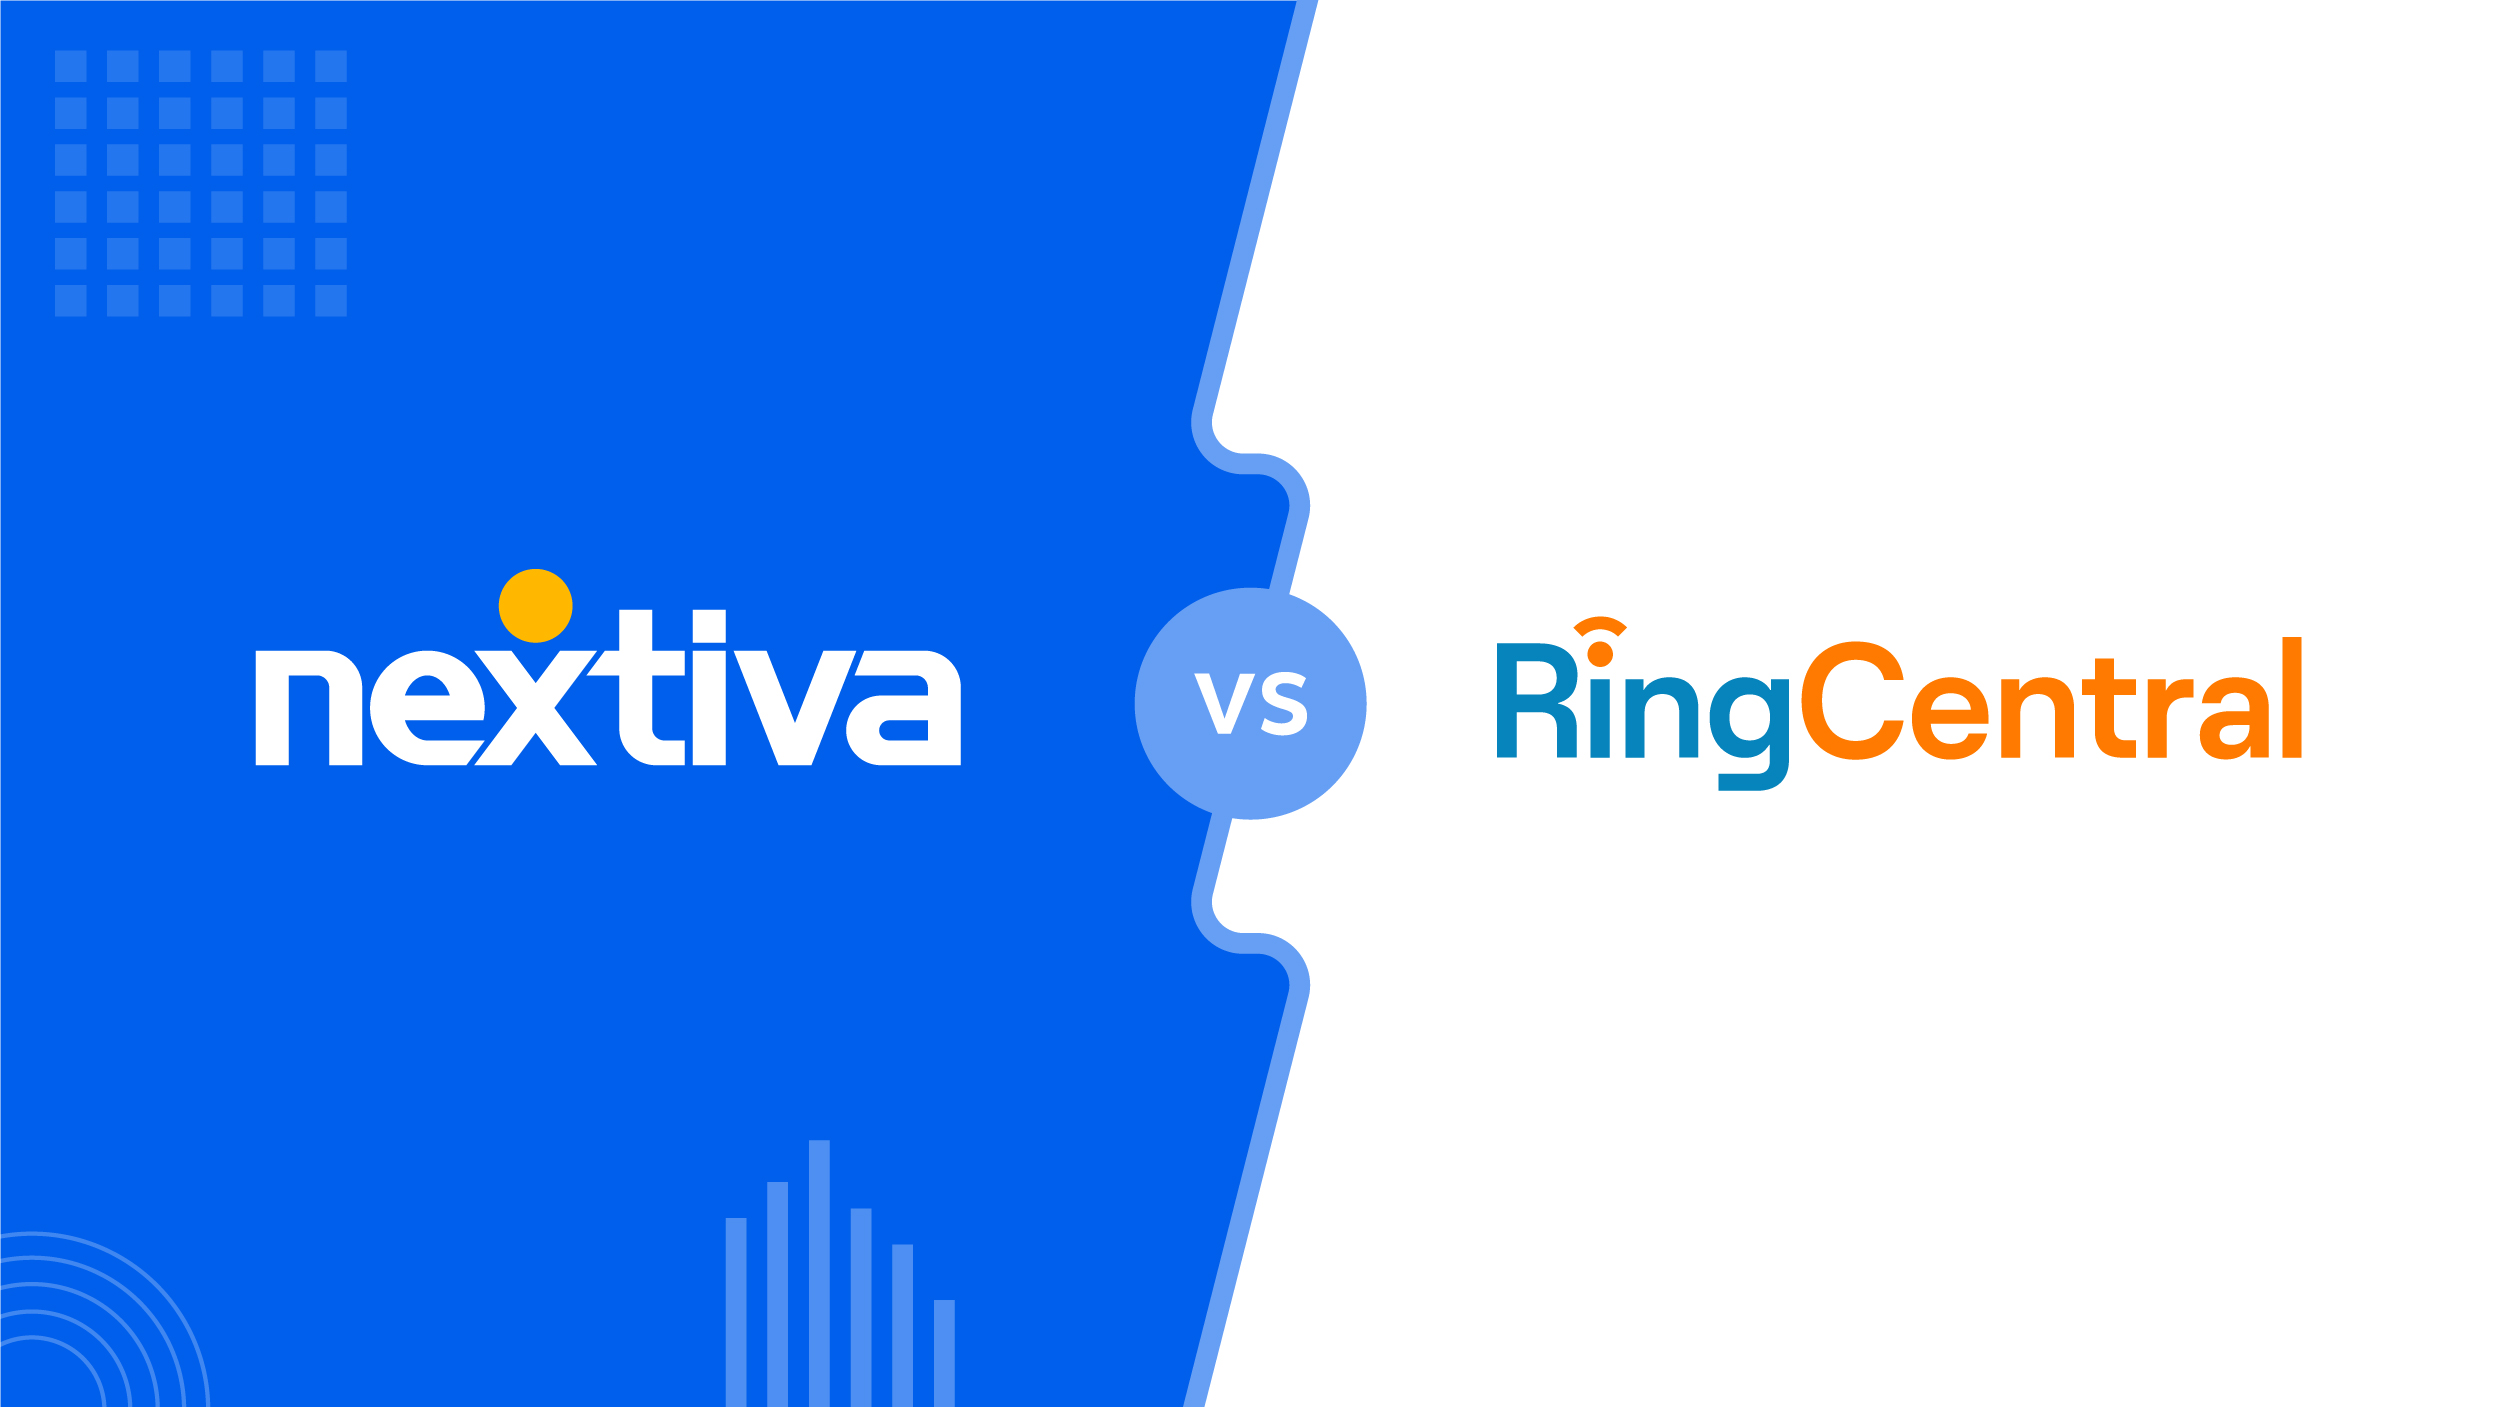 Nextiva Reviews & Ratings from 8,400+ Verified Customers